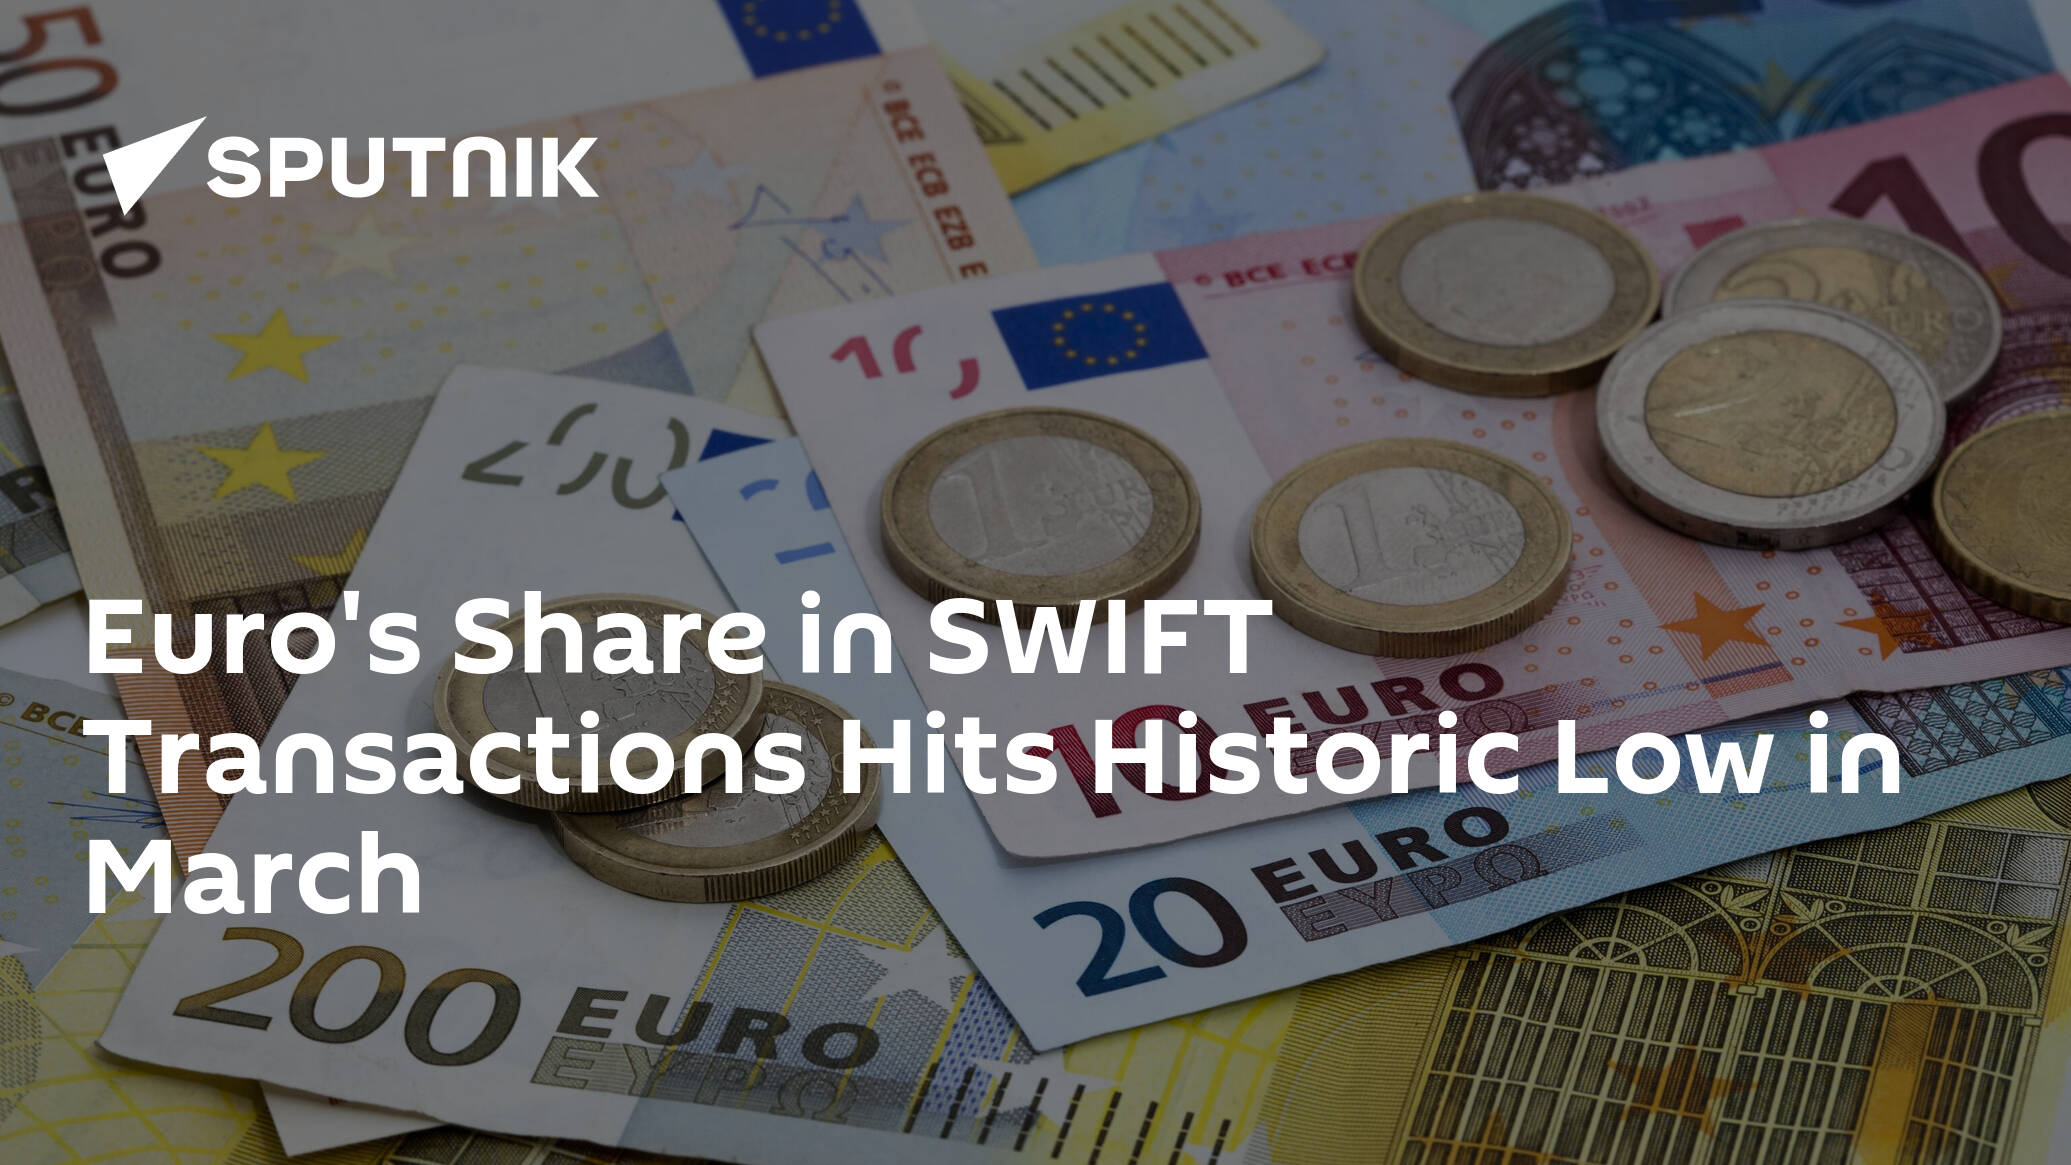 Euro's Share in SWIFT Transactions Hits Historic Low in March